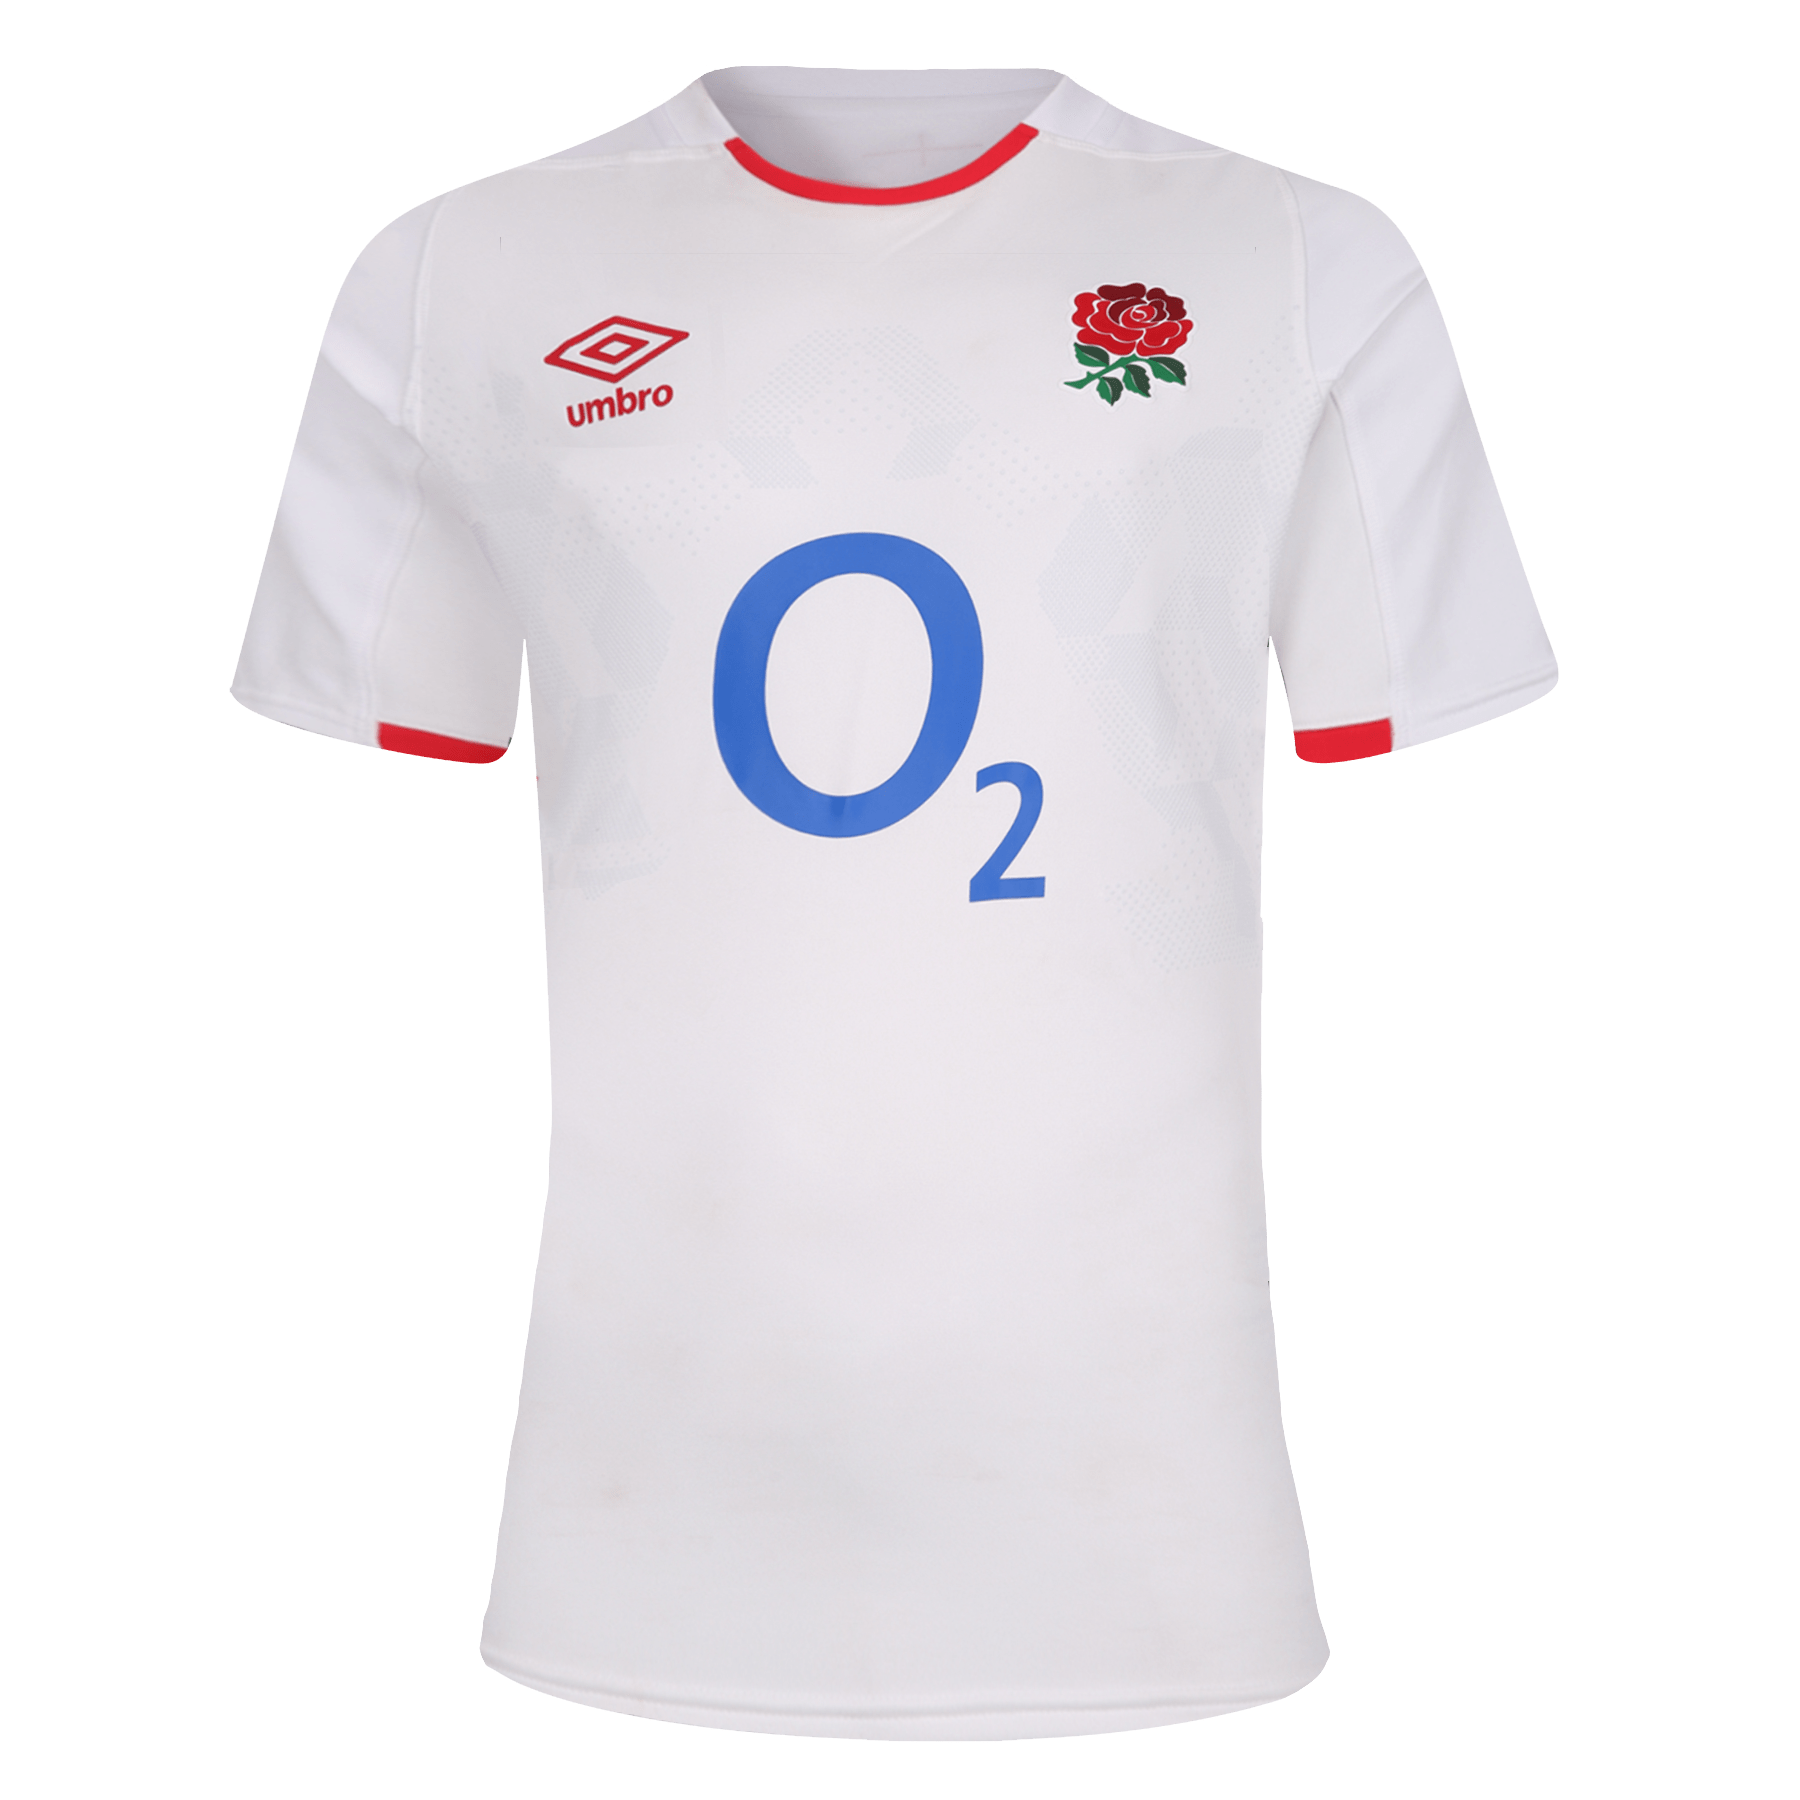 rugby style jersey